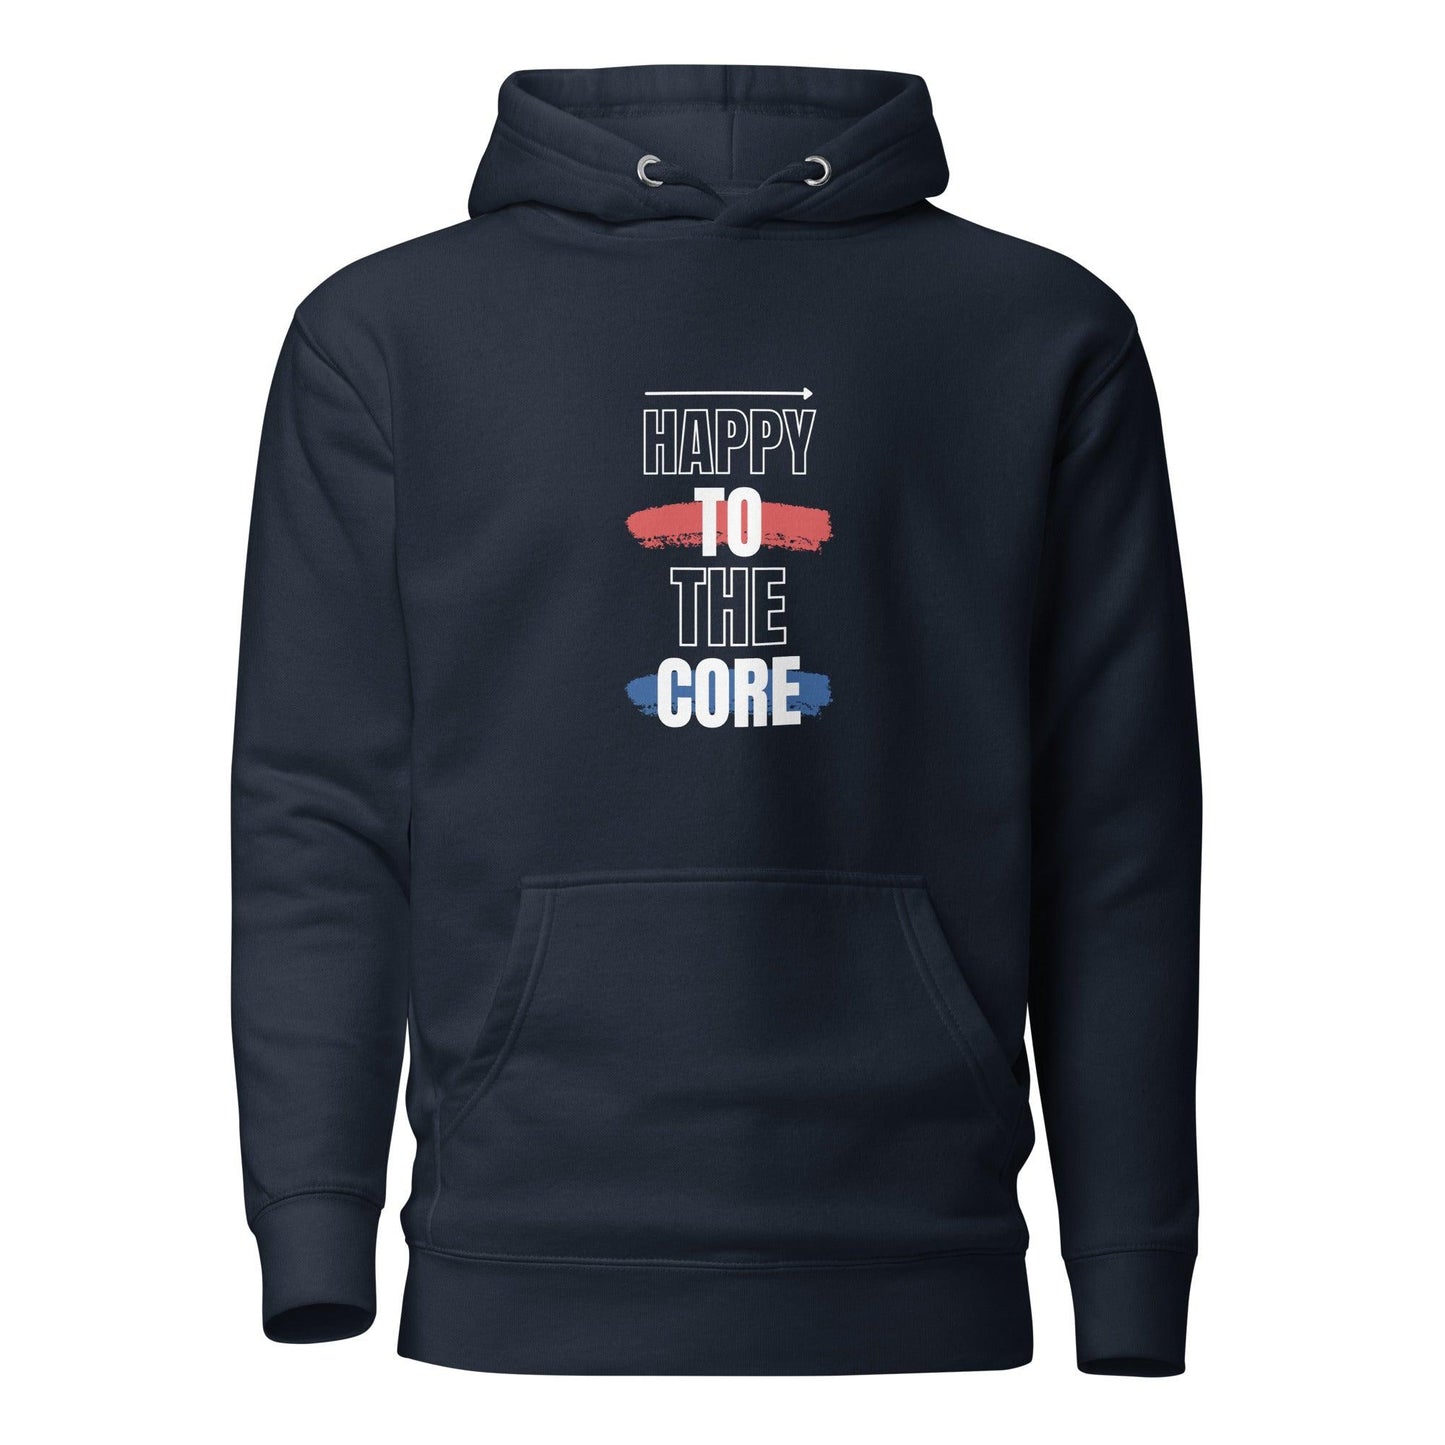 Happy To The Core, Premium Unisex Hoodie | Positive Affirmation Clothing - Affirm Effect